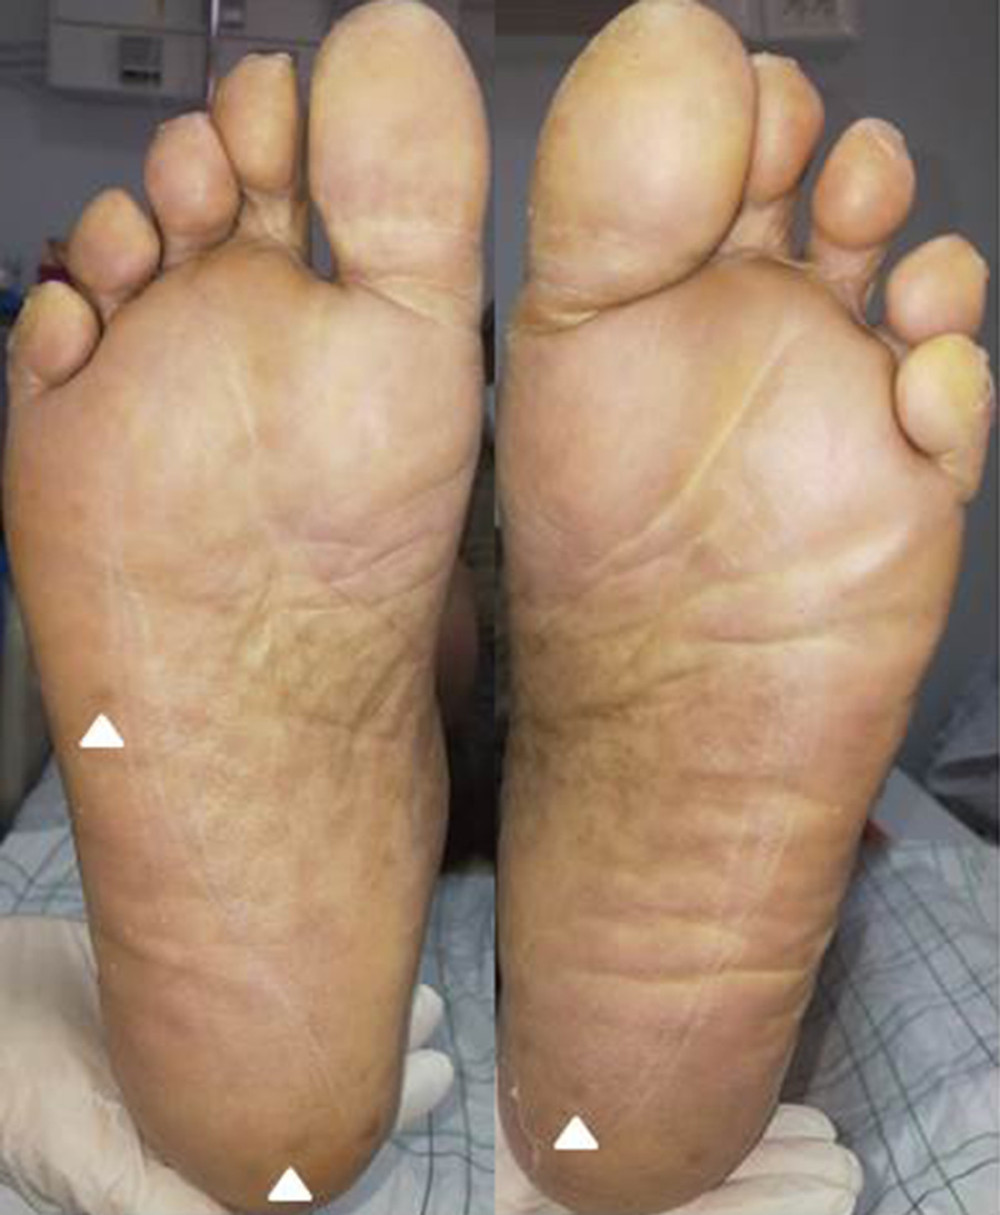 Pigmented papules on the soles (white head arrows).